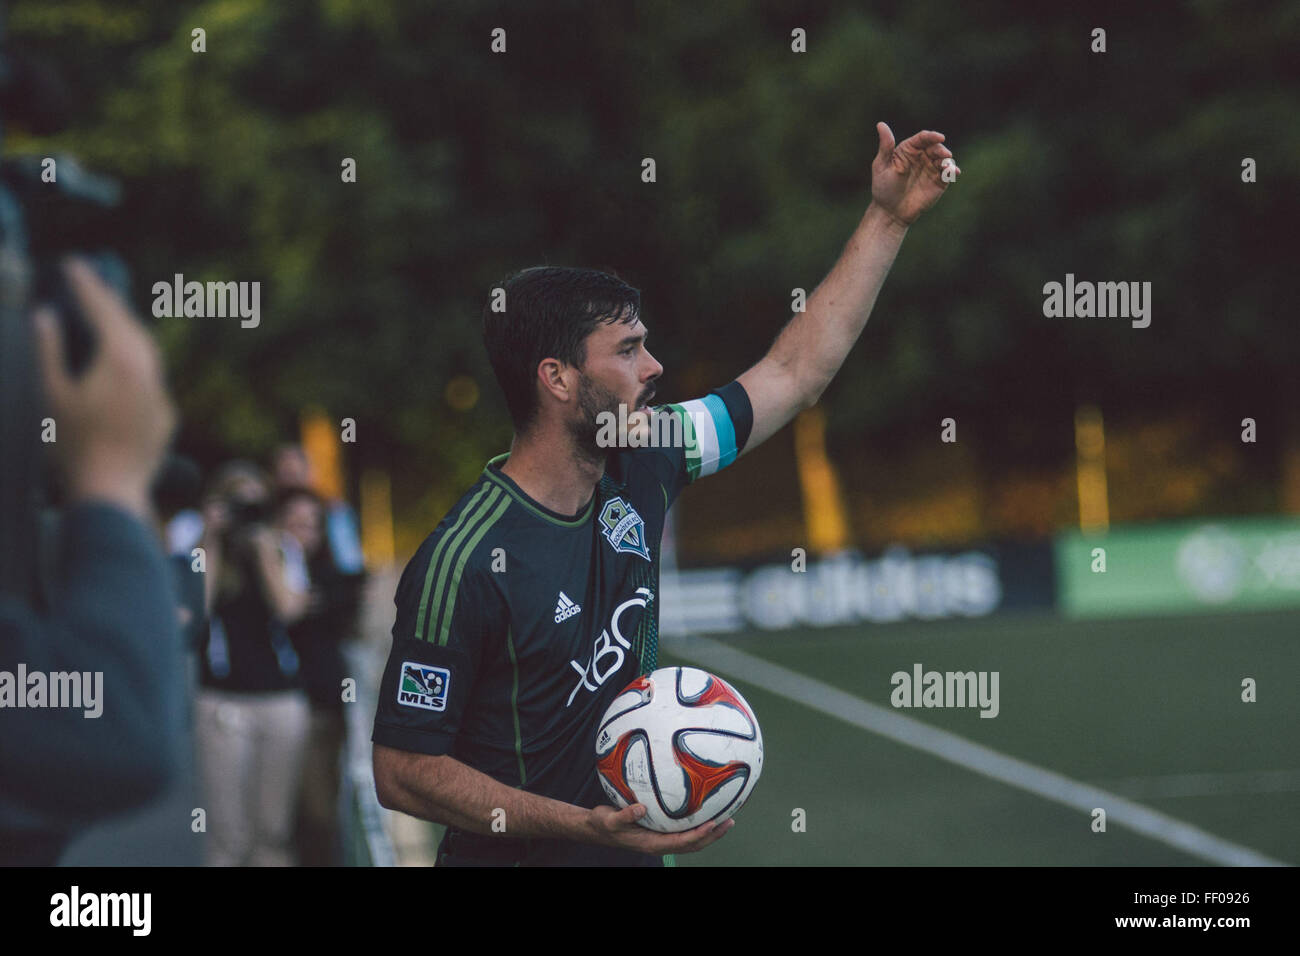 Male Soccer/Football Player Holding Ball Male SoccerFootball Player Holding Ball Stock Photo